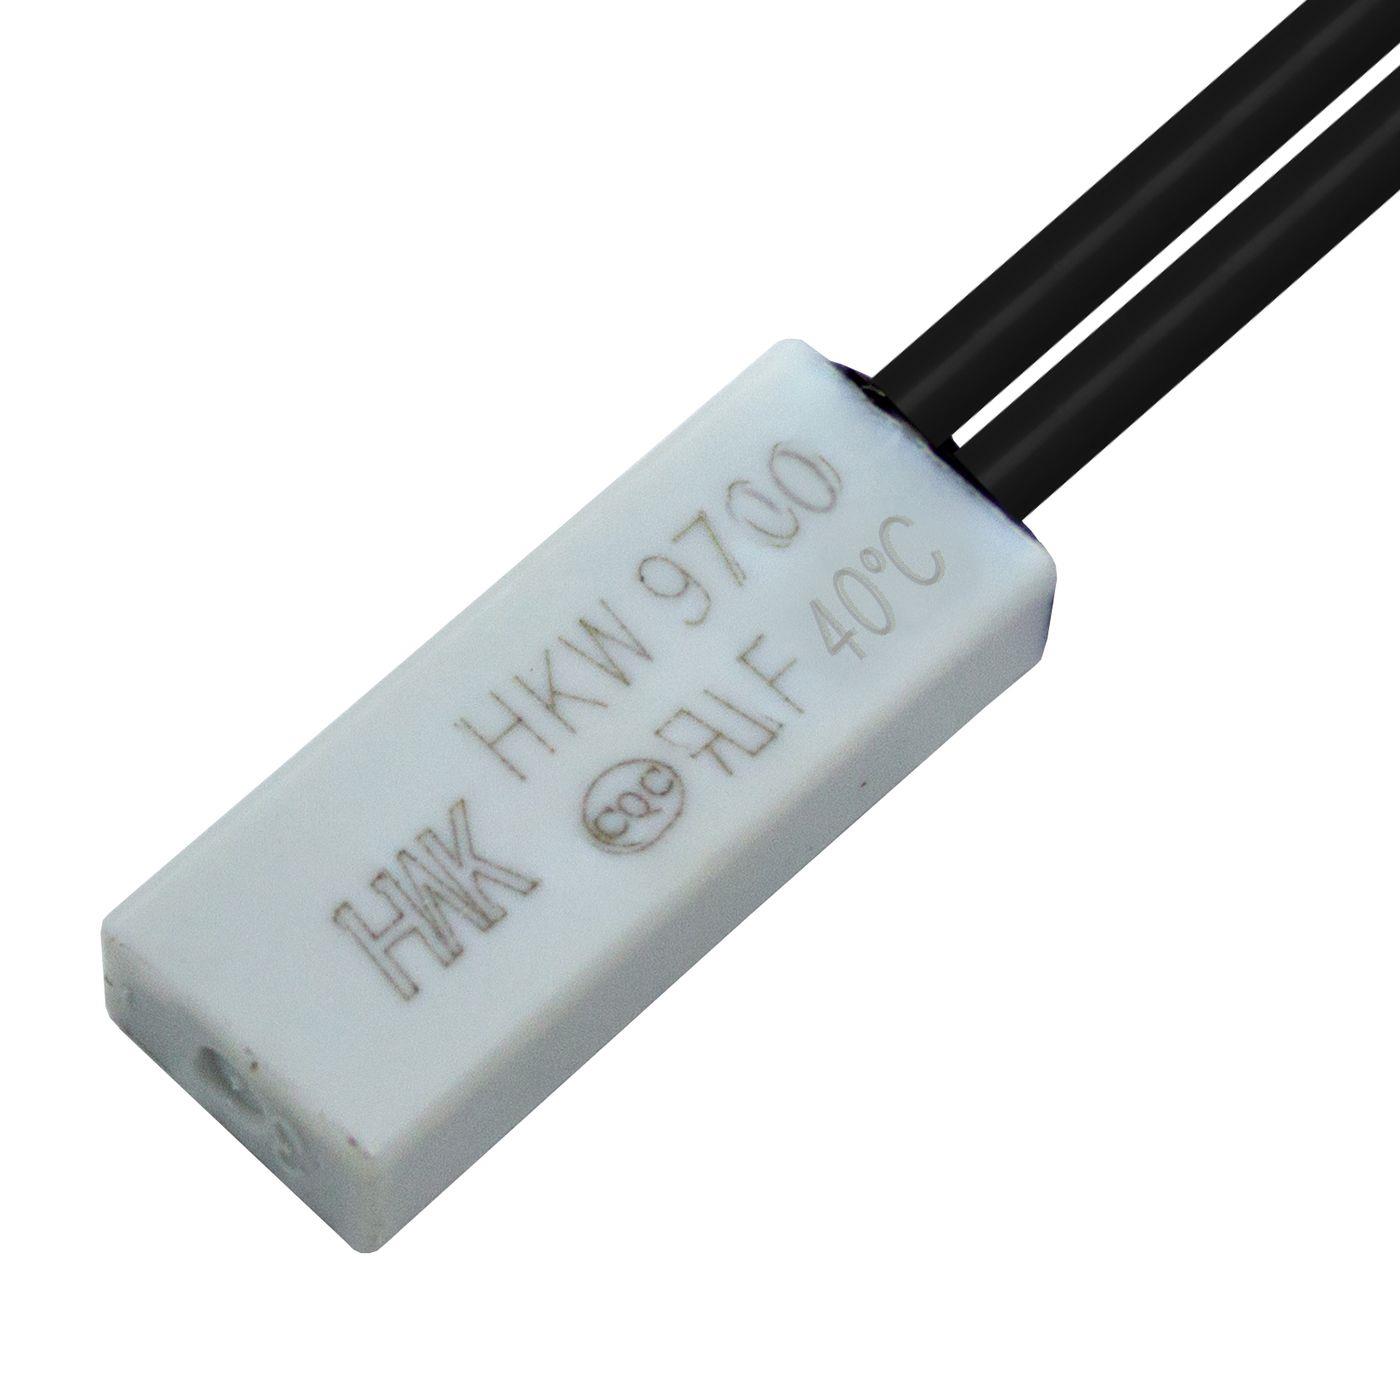 Thermal switch 40°C NC contact 250V 5A Cable Temperature switch thermostat Bimetal Thermal protection